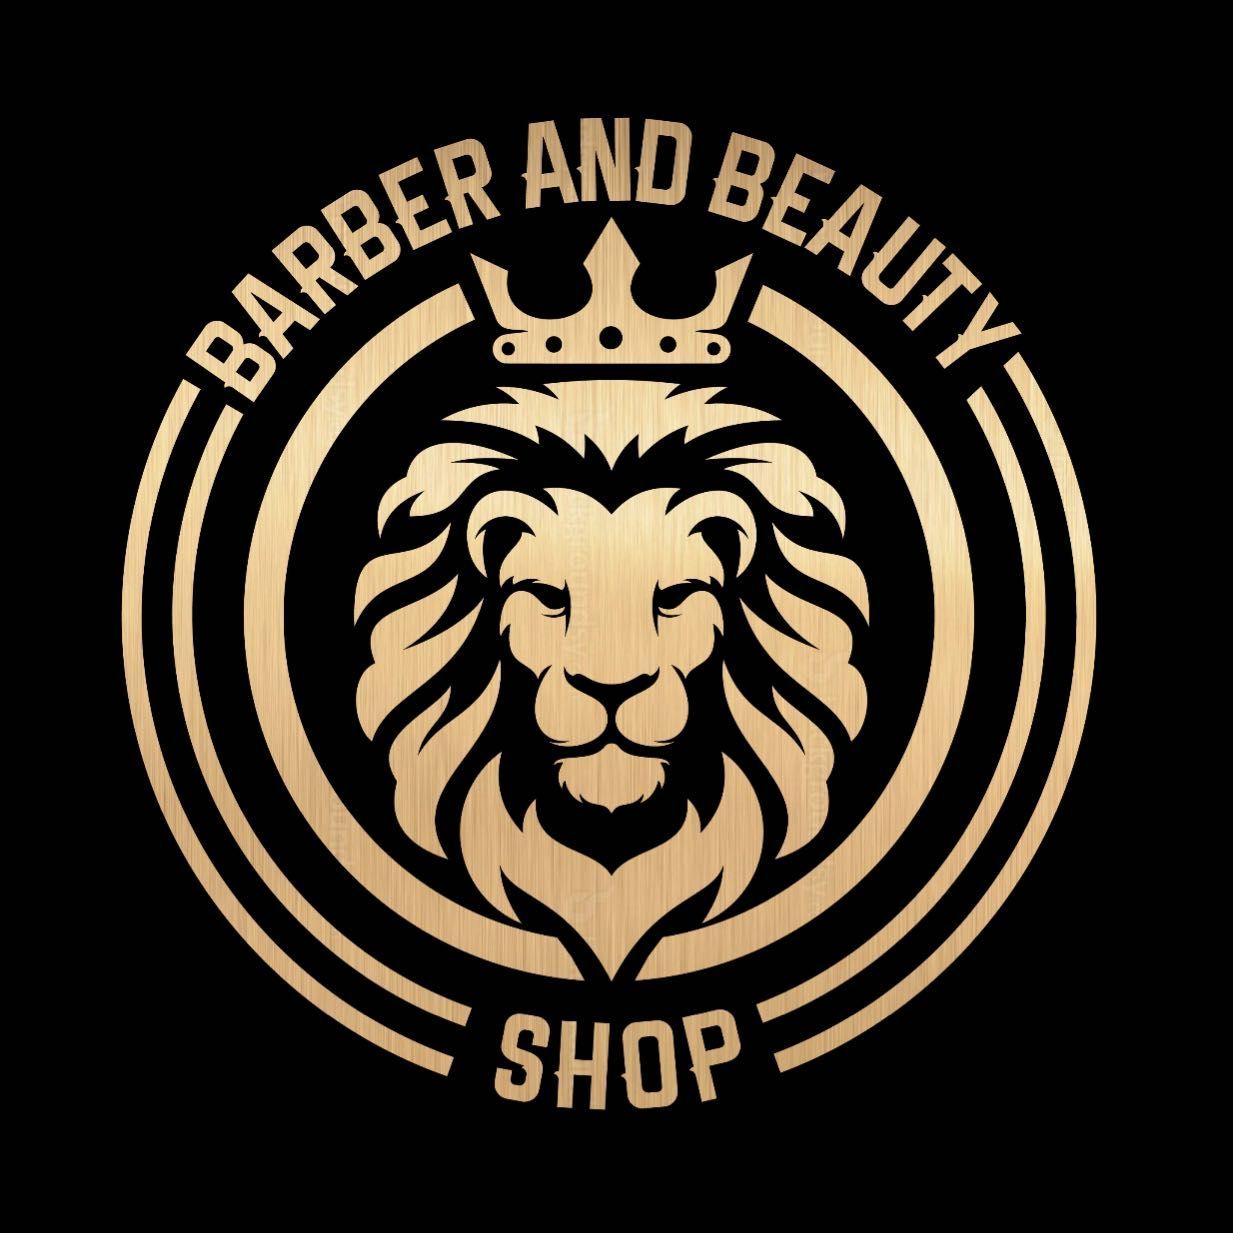 Barber And Beauty Shop, 6006 N 83rd Ave, Glendale, 85303